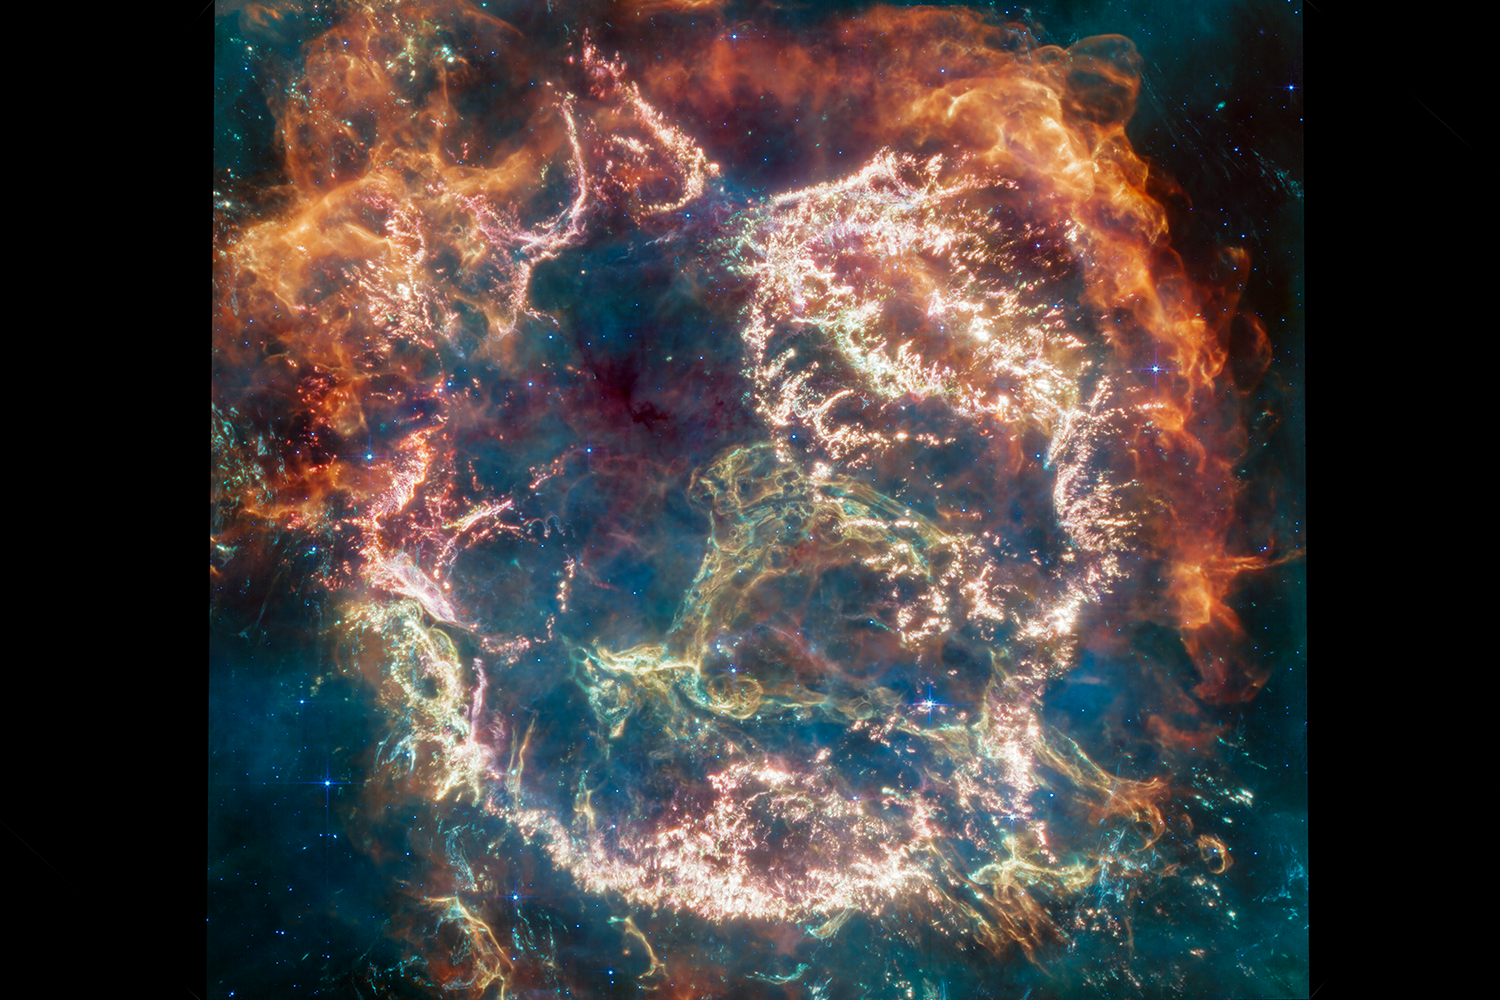 Wisps of colorful gas and dust in a telescope image showing the remains of a supernova explosion